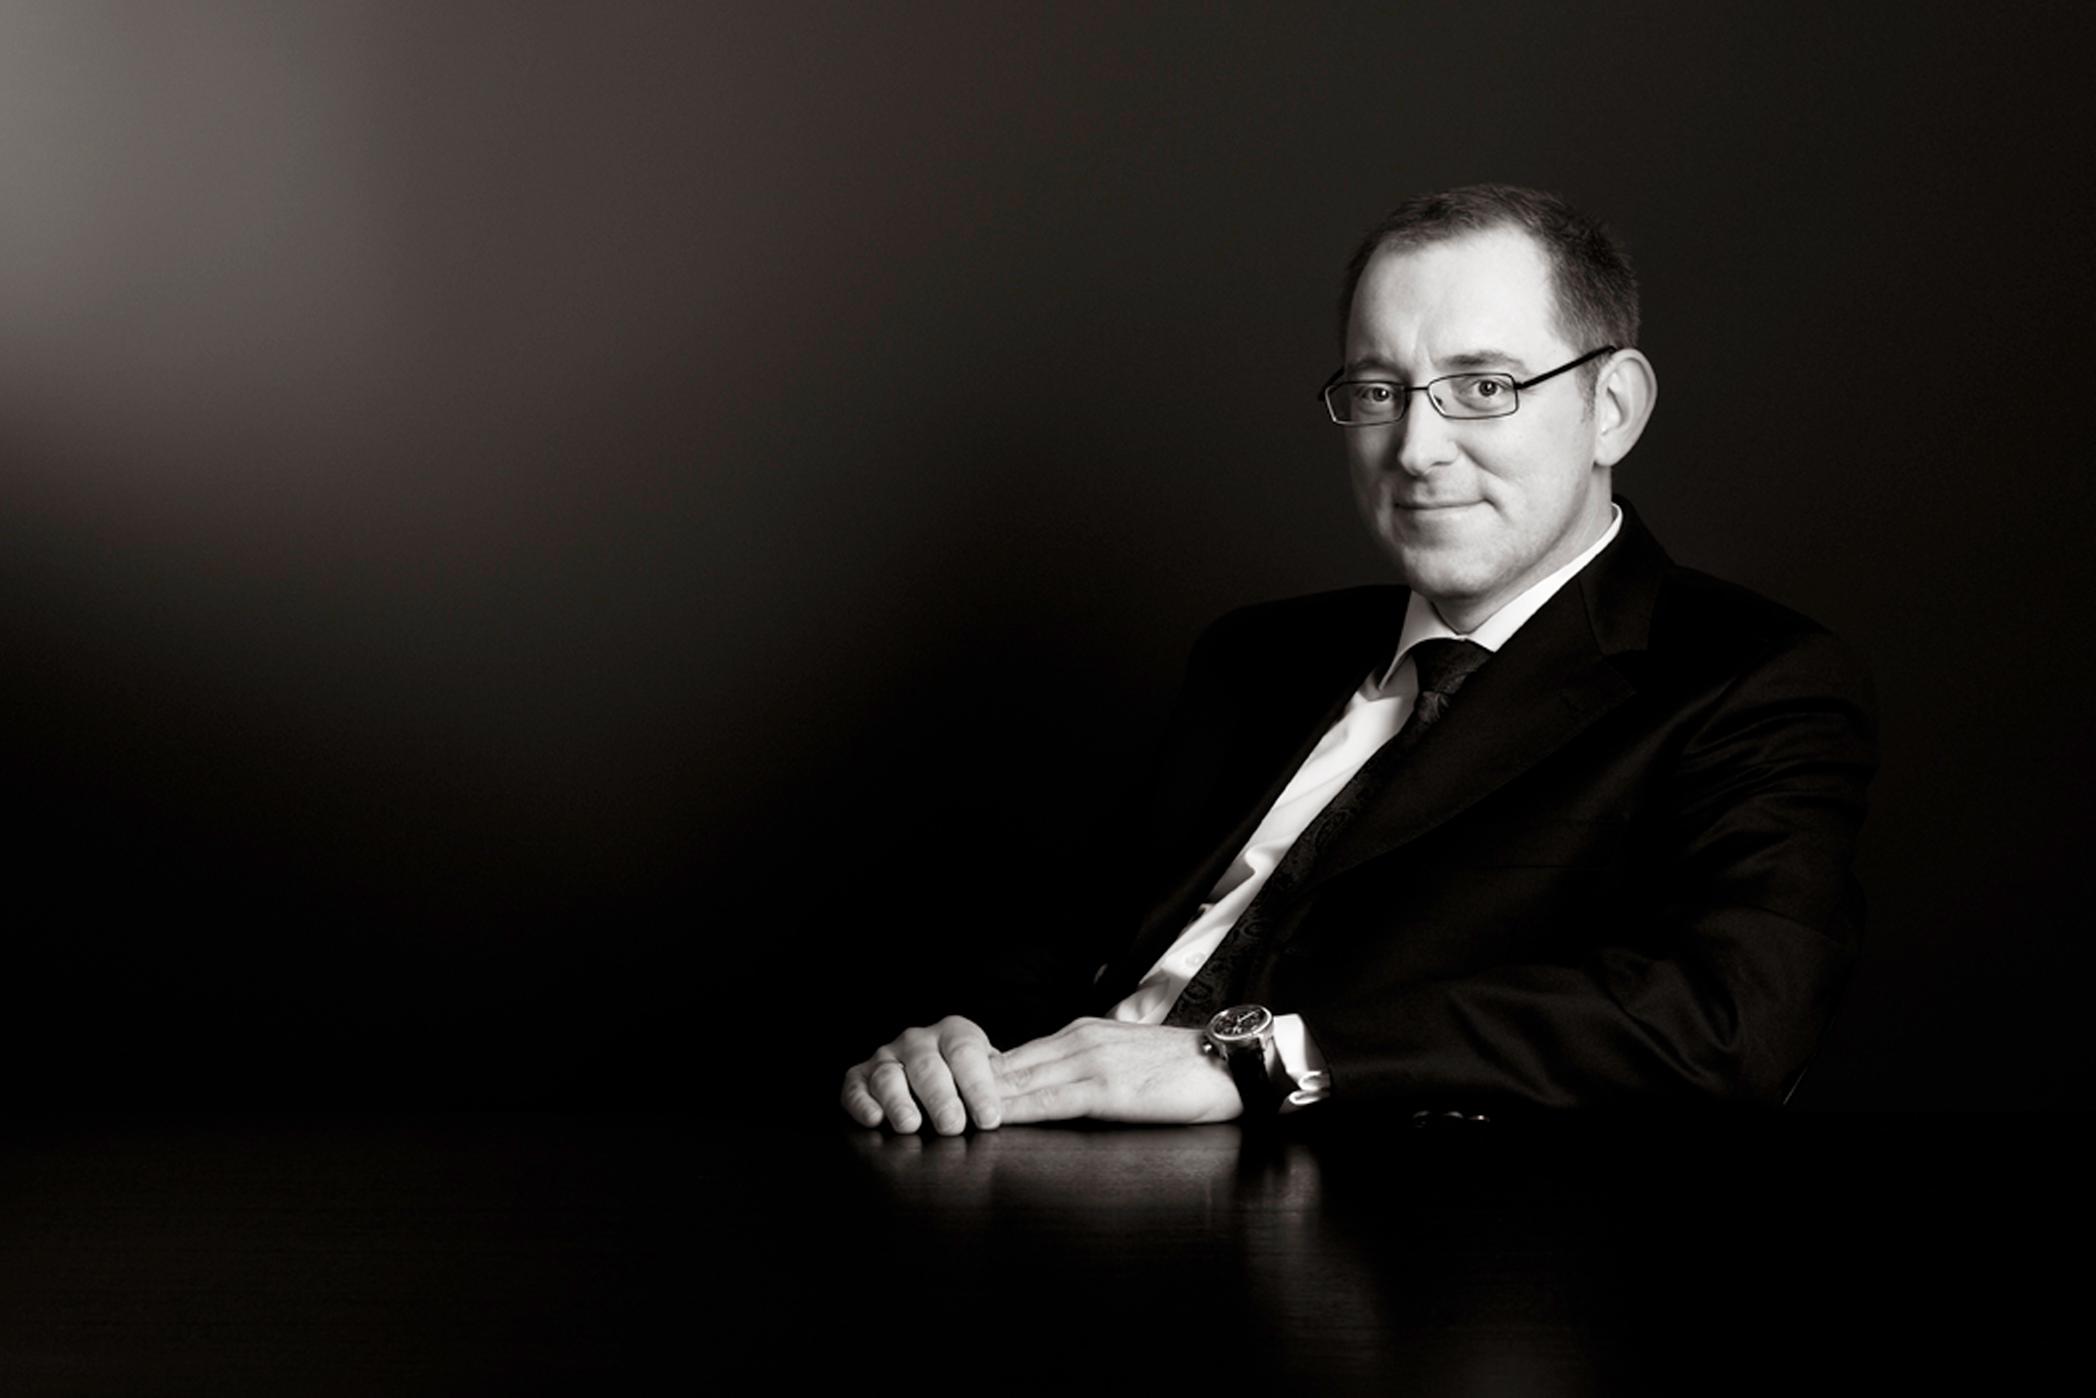 Black and white photo of a man sitting down, wearing glasses and a suit.